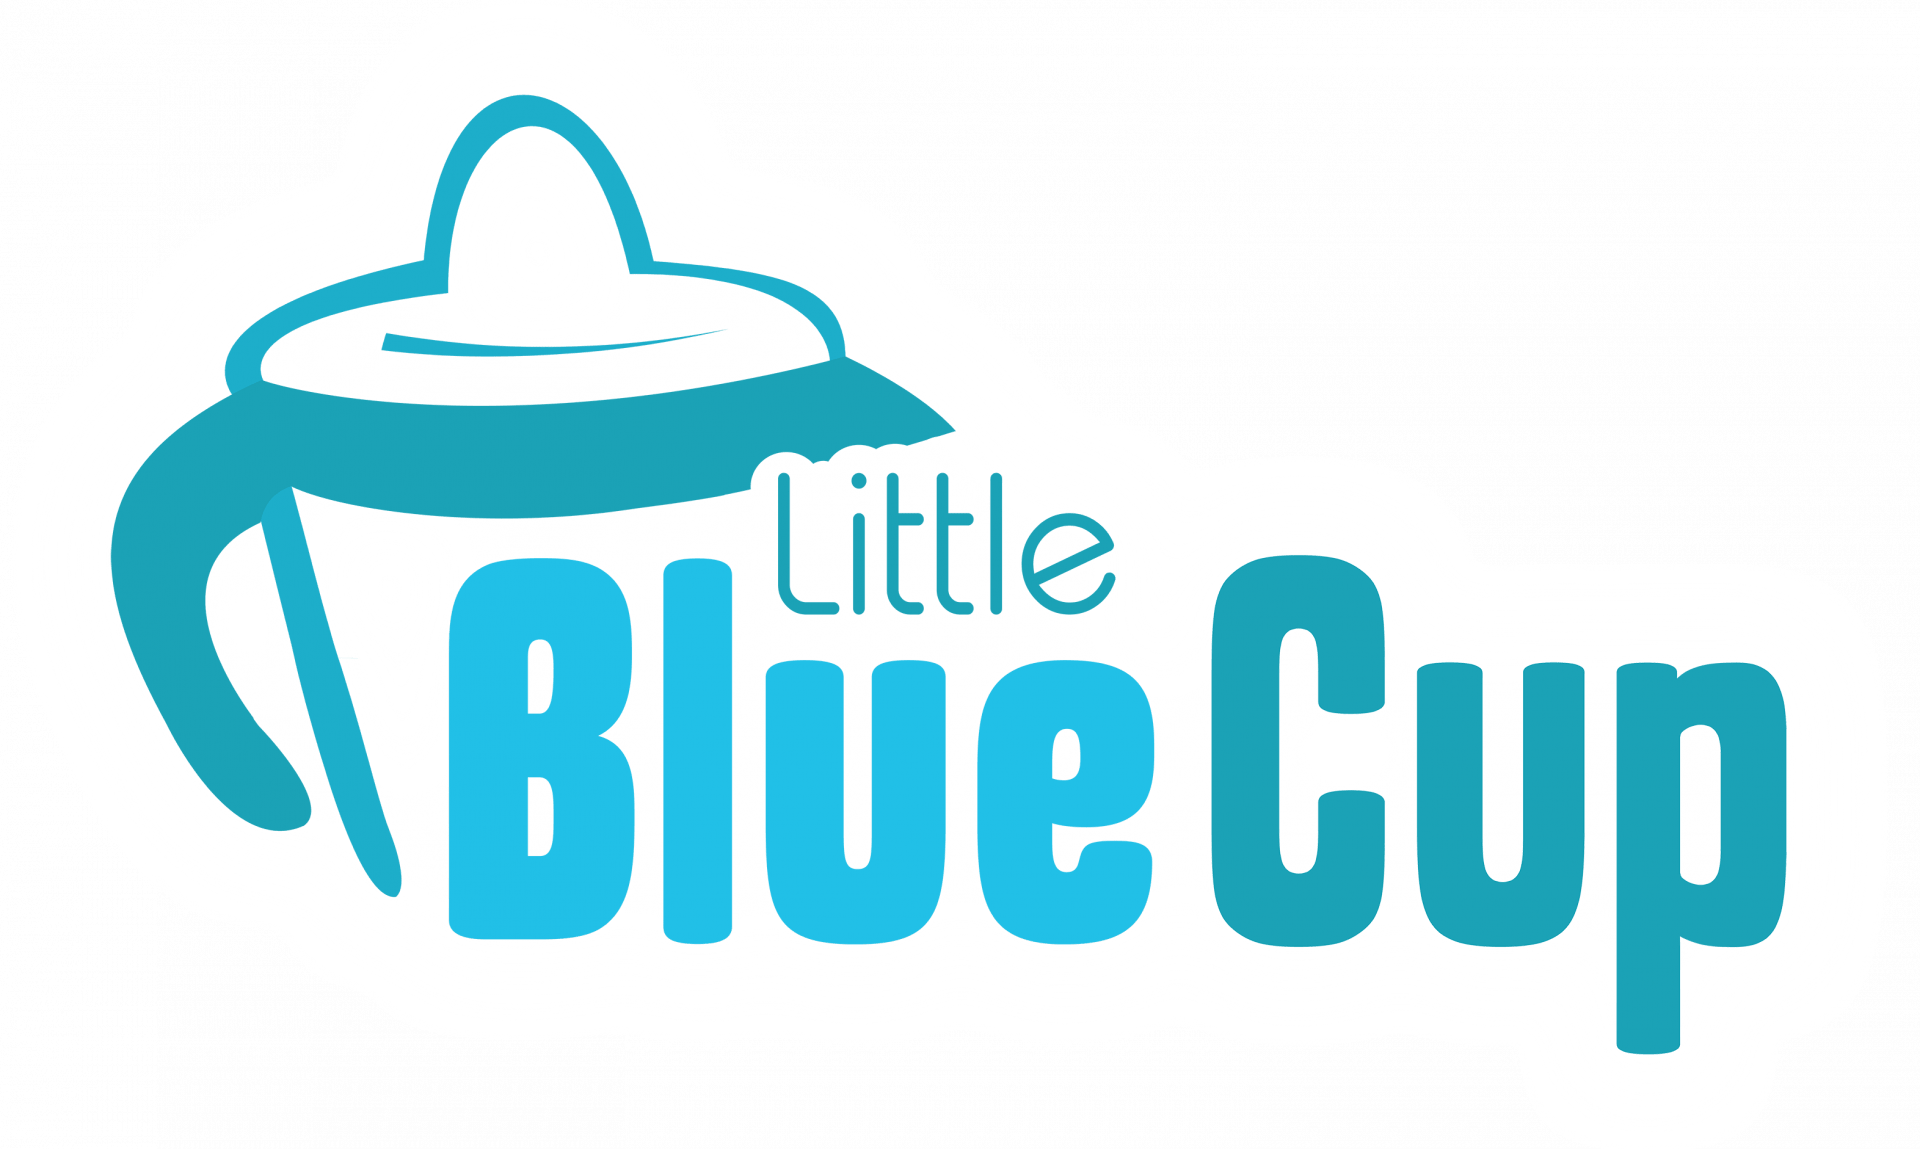 clipart cup blue cup